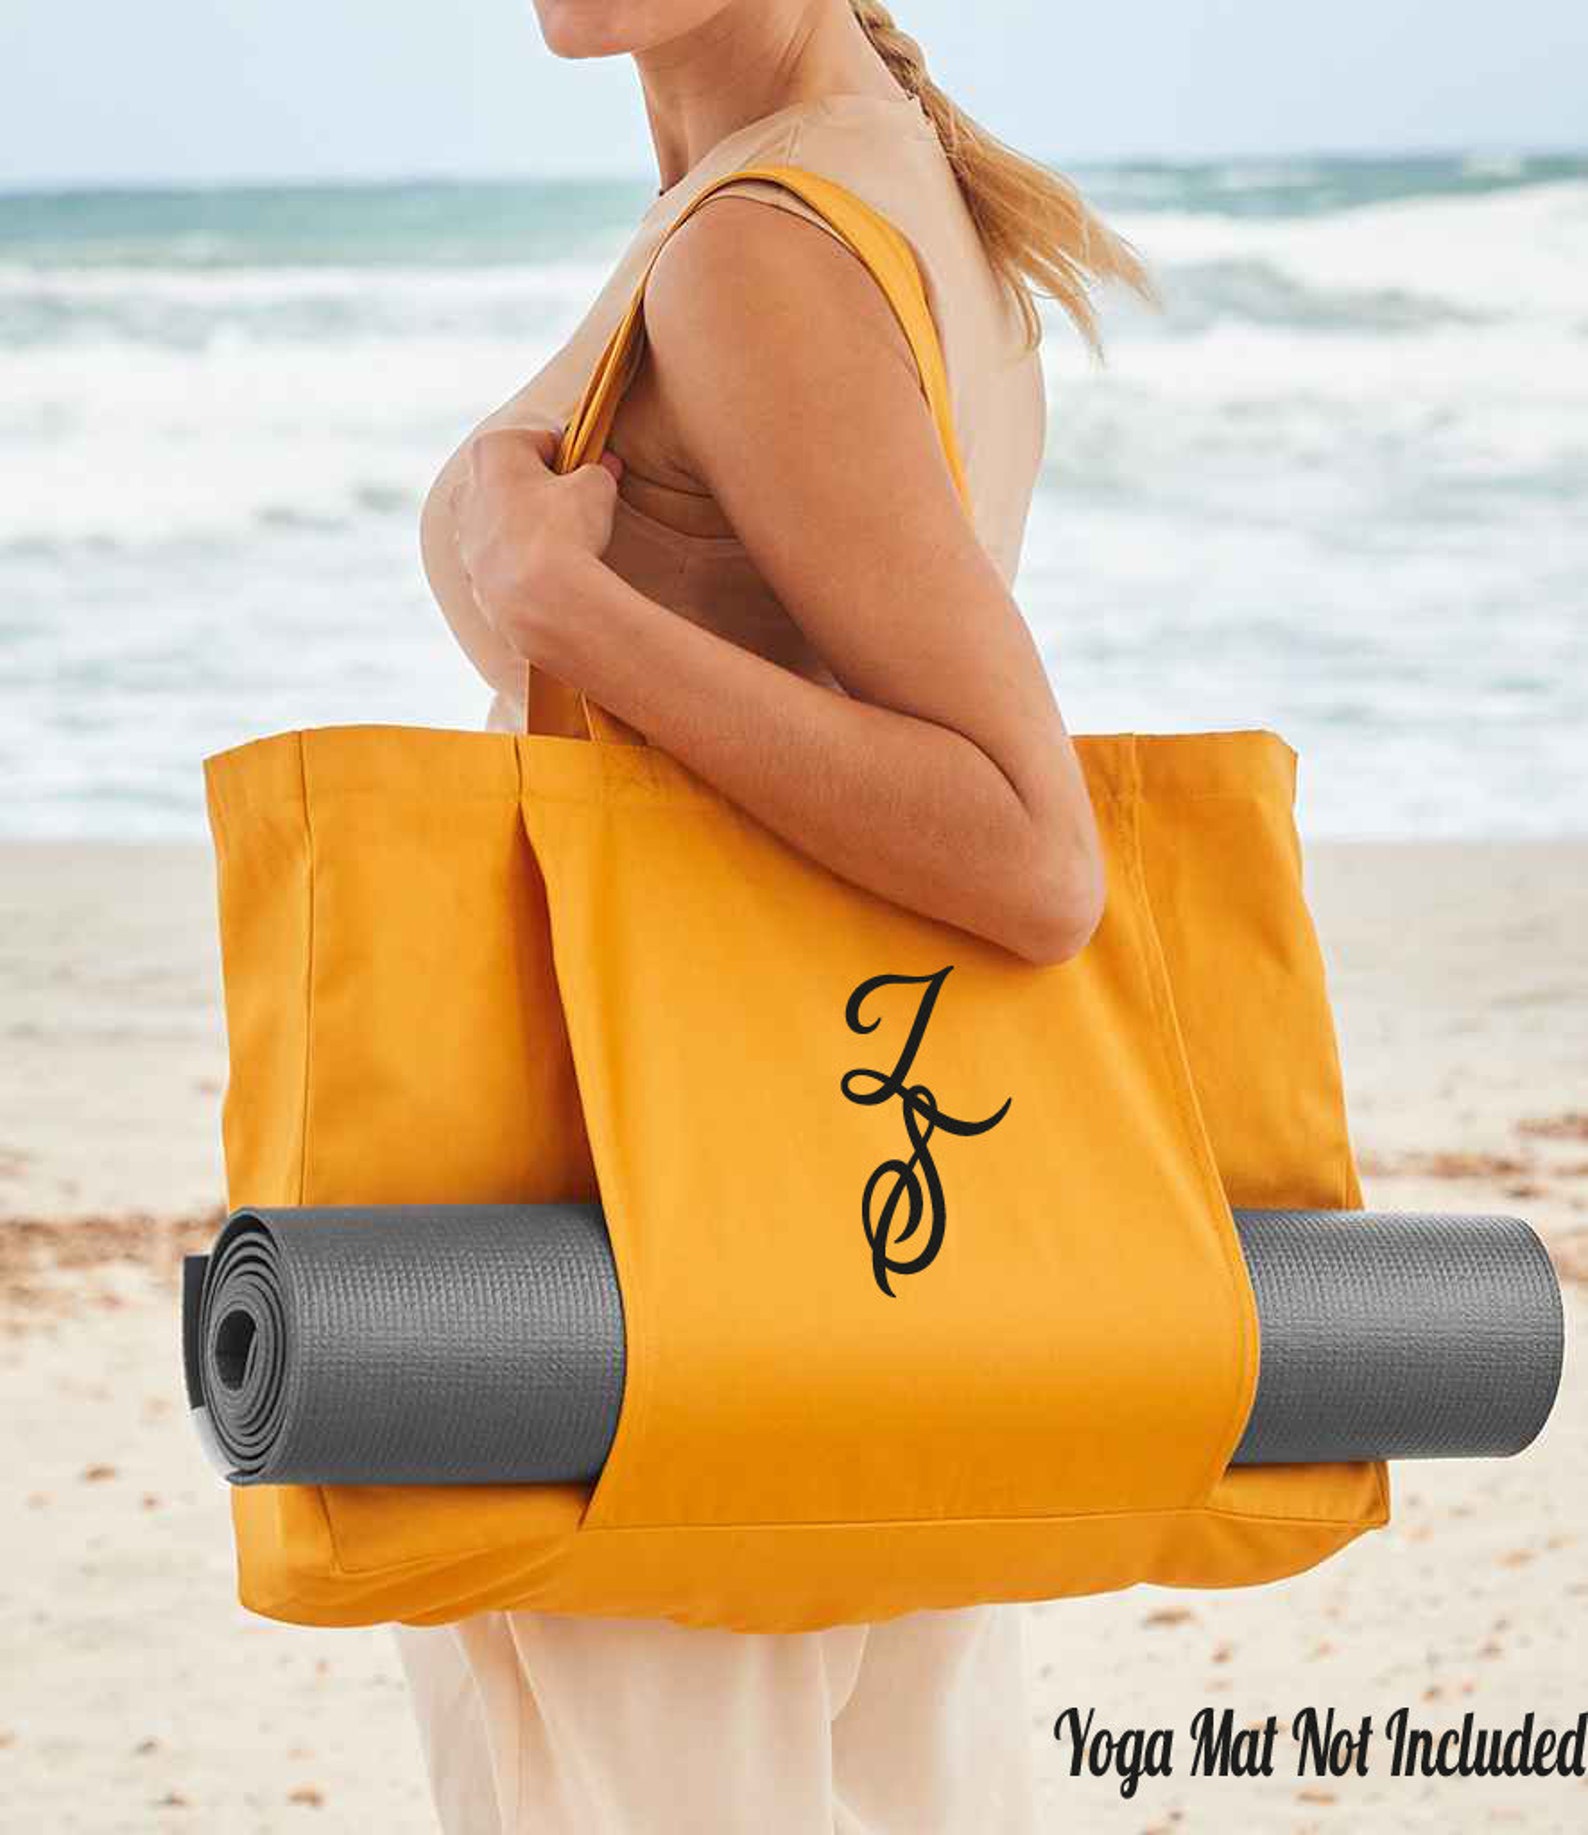 Organic Yoga Tote Bag - Personalized Yoga Gift for Her